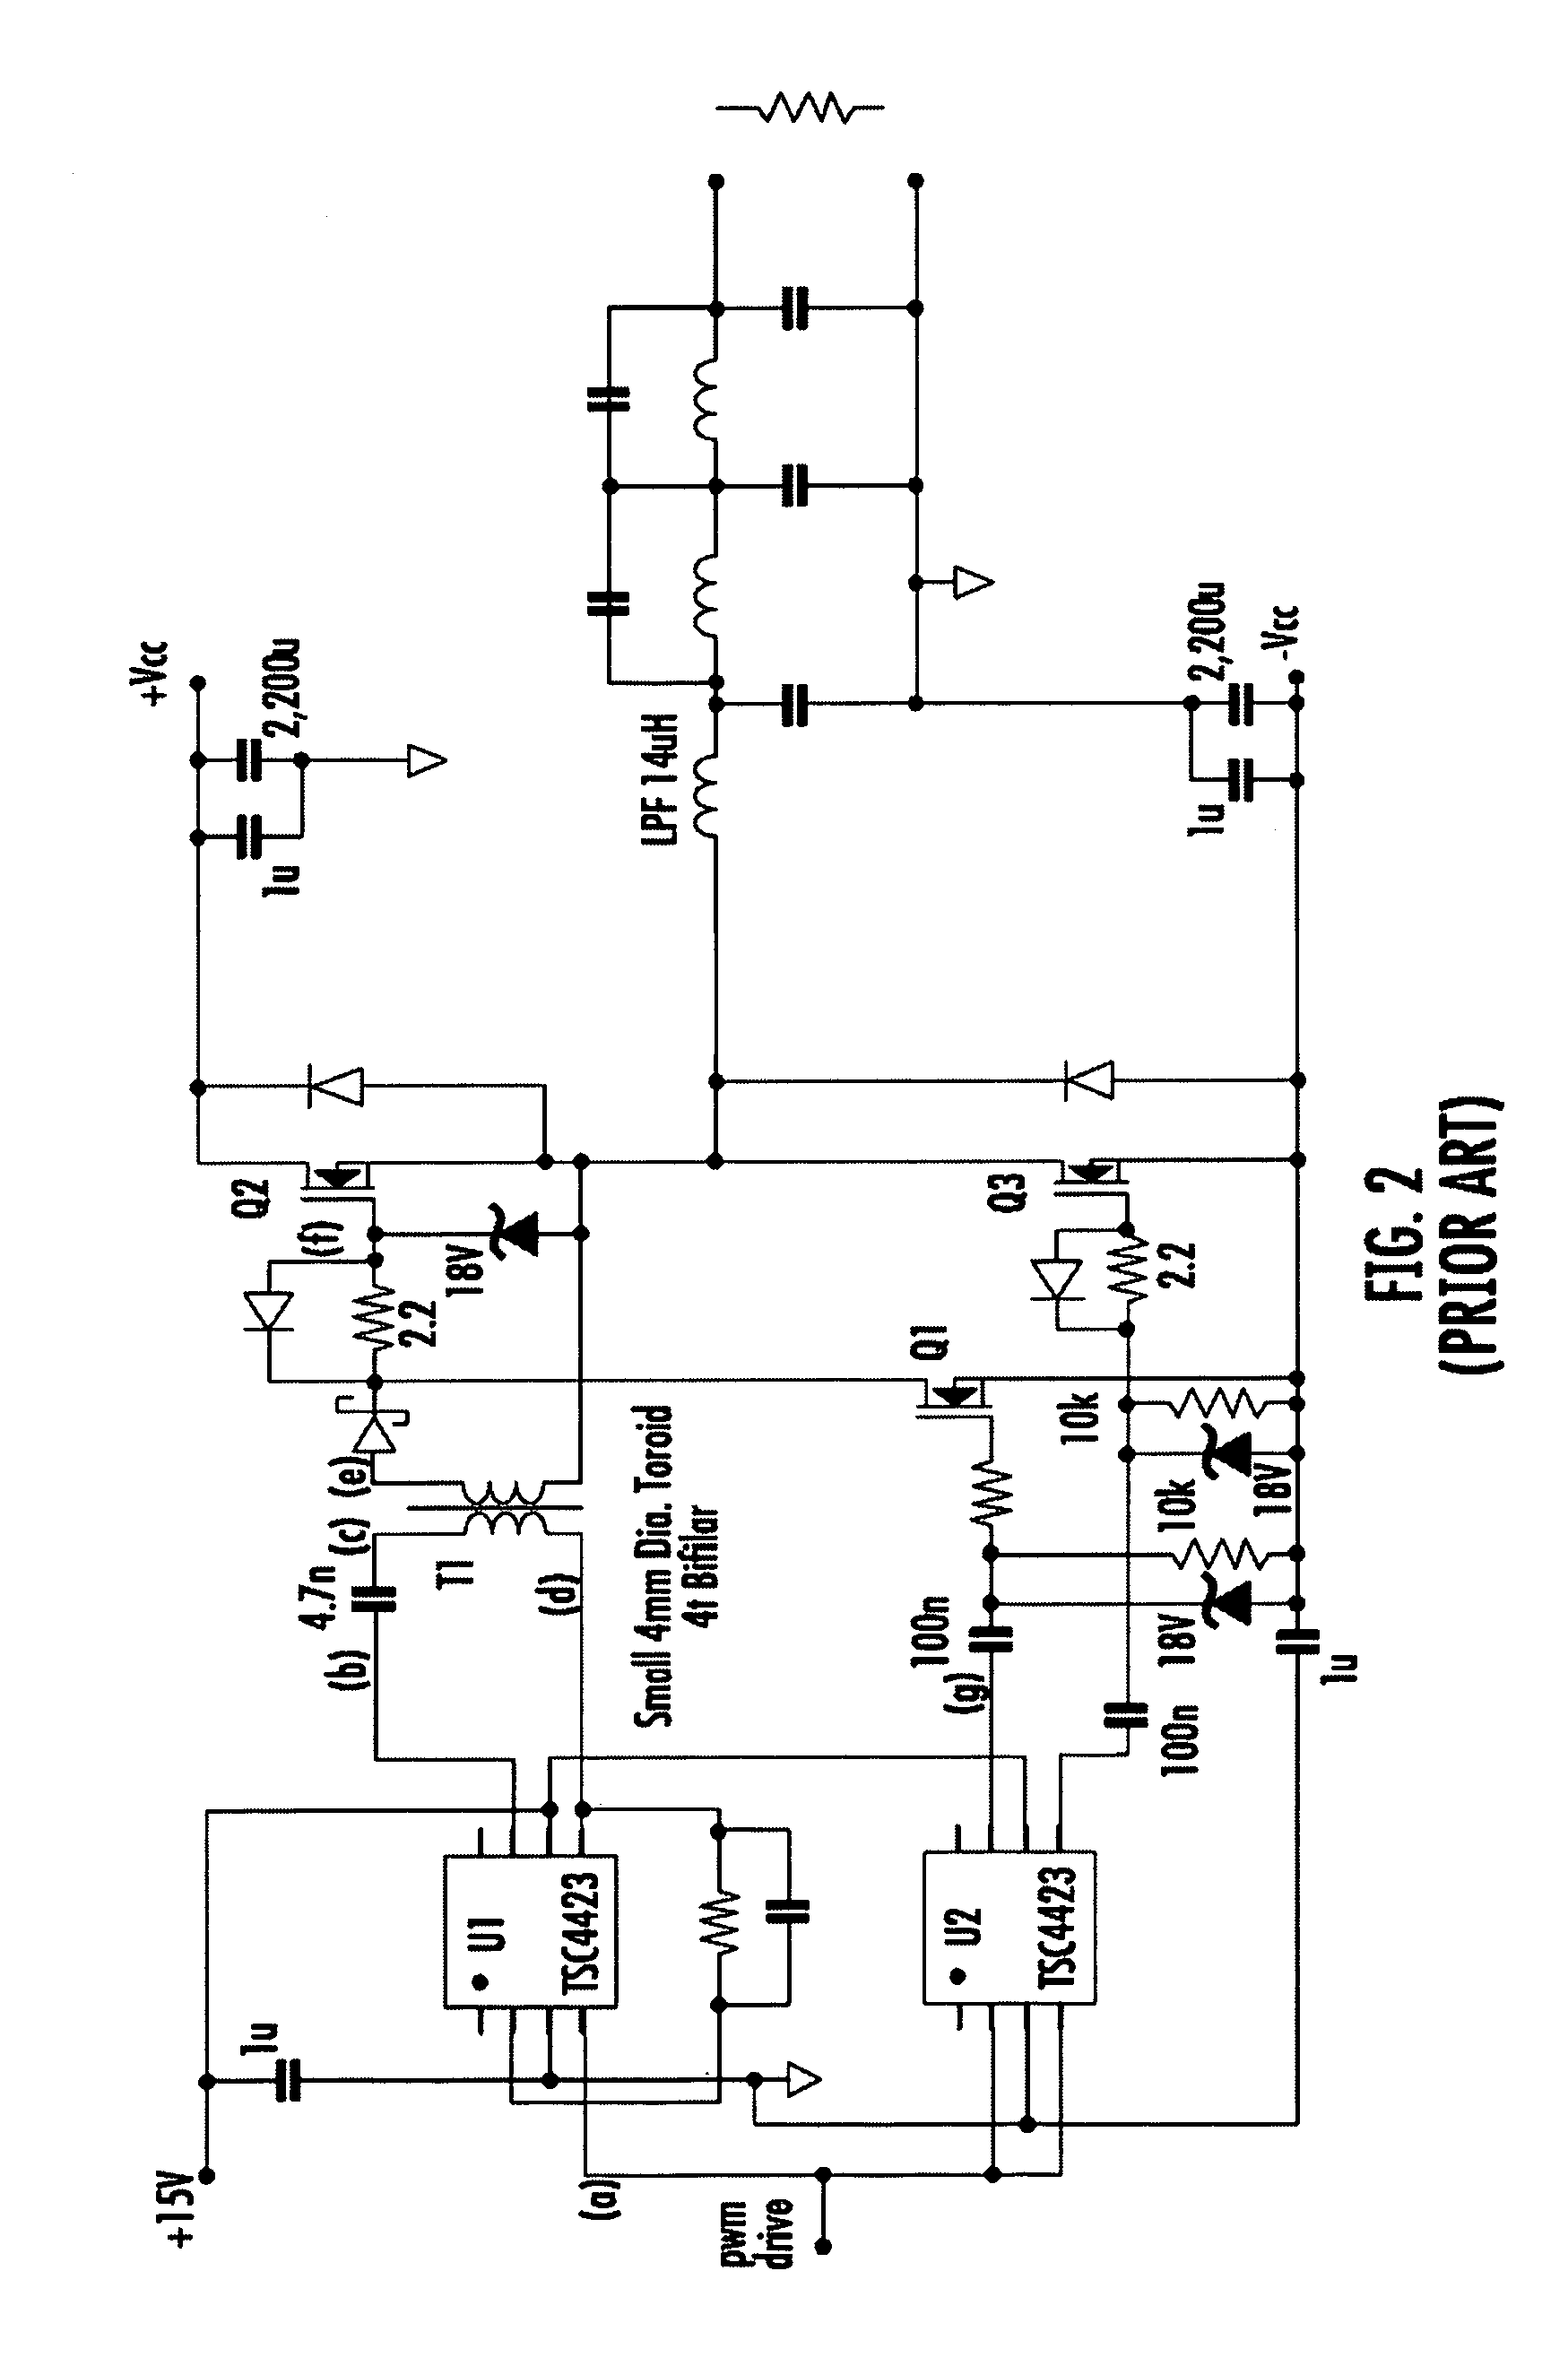 Switching amplifiers